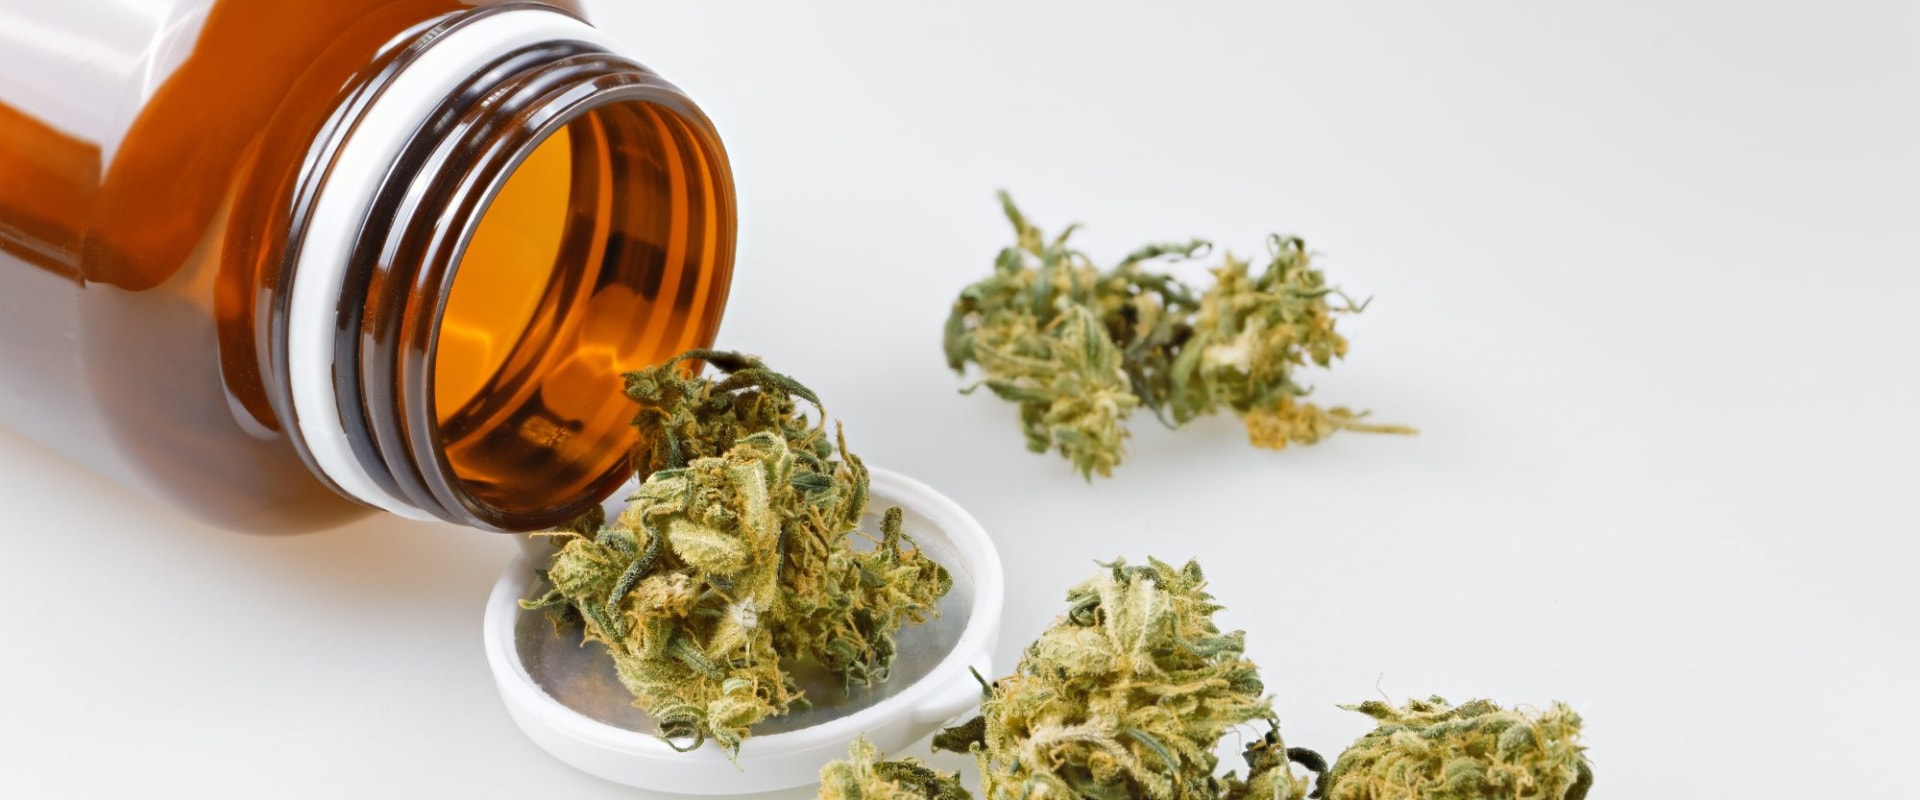 What are cannabinoid drugs?